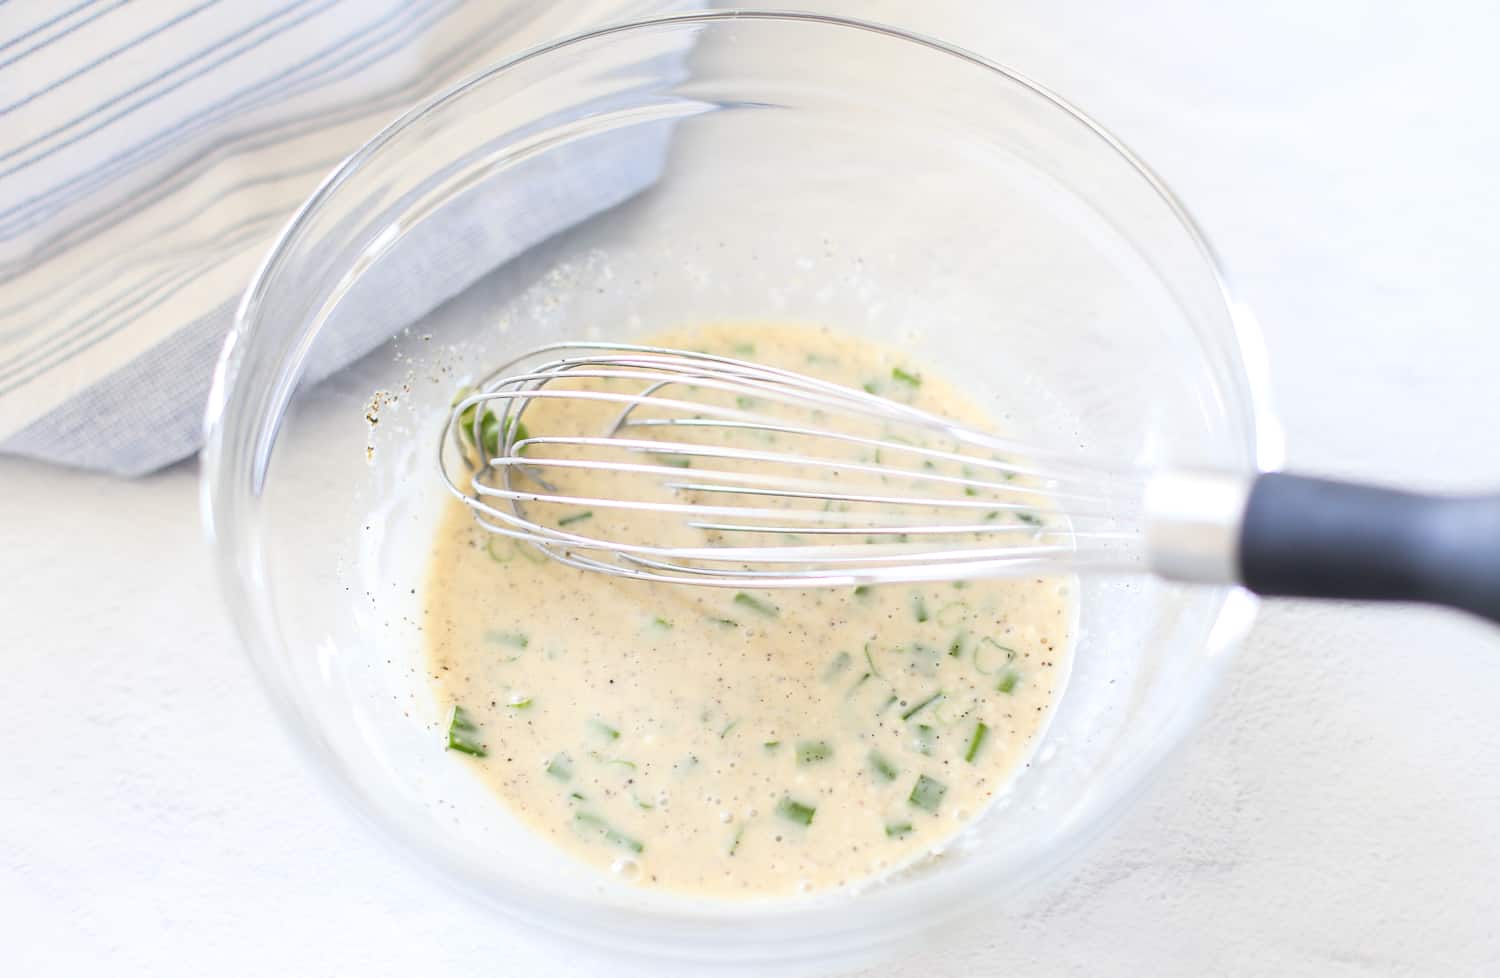 Coleslaw dressing being whisked together in a glass serving bowl.